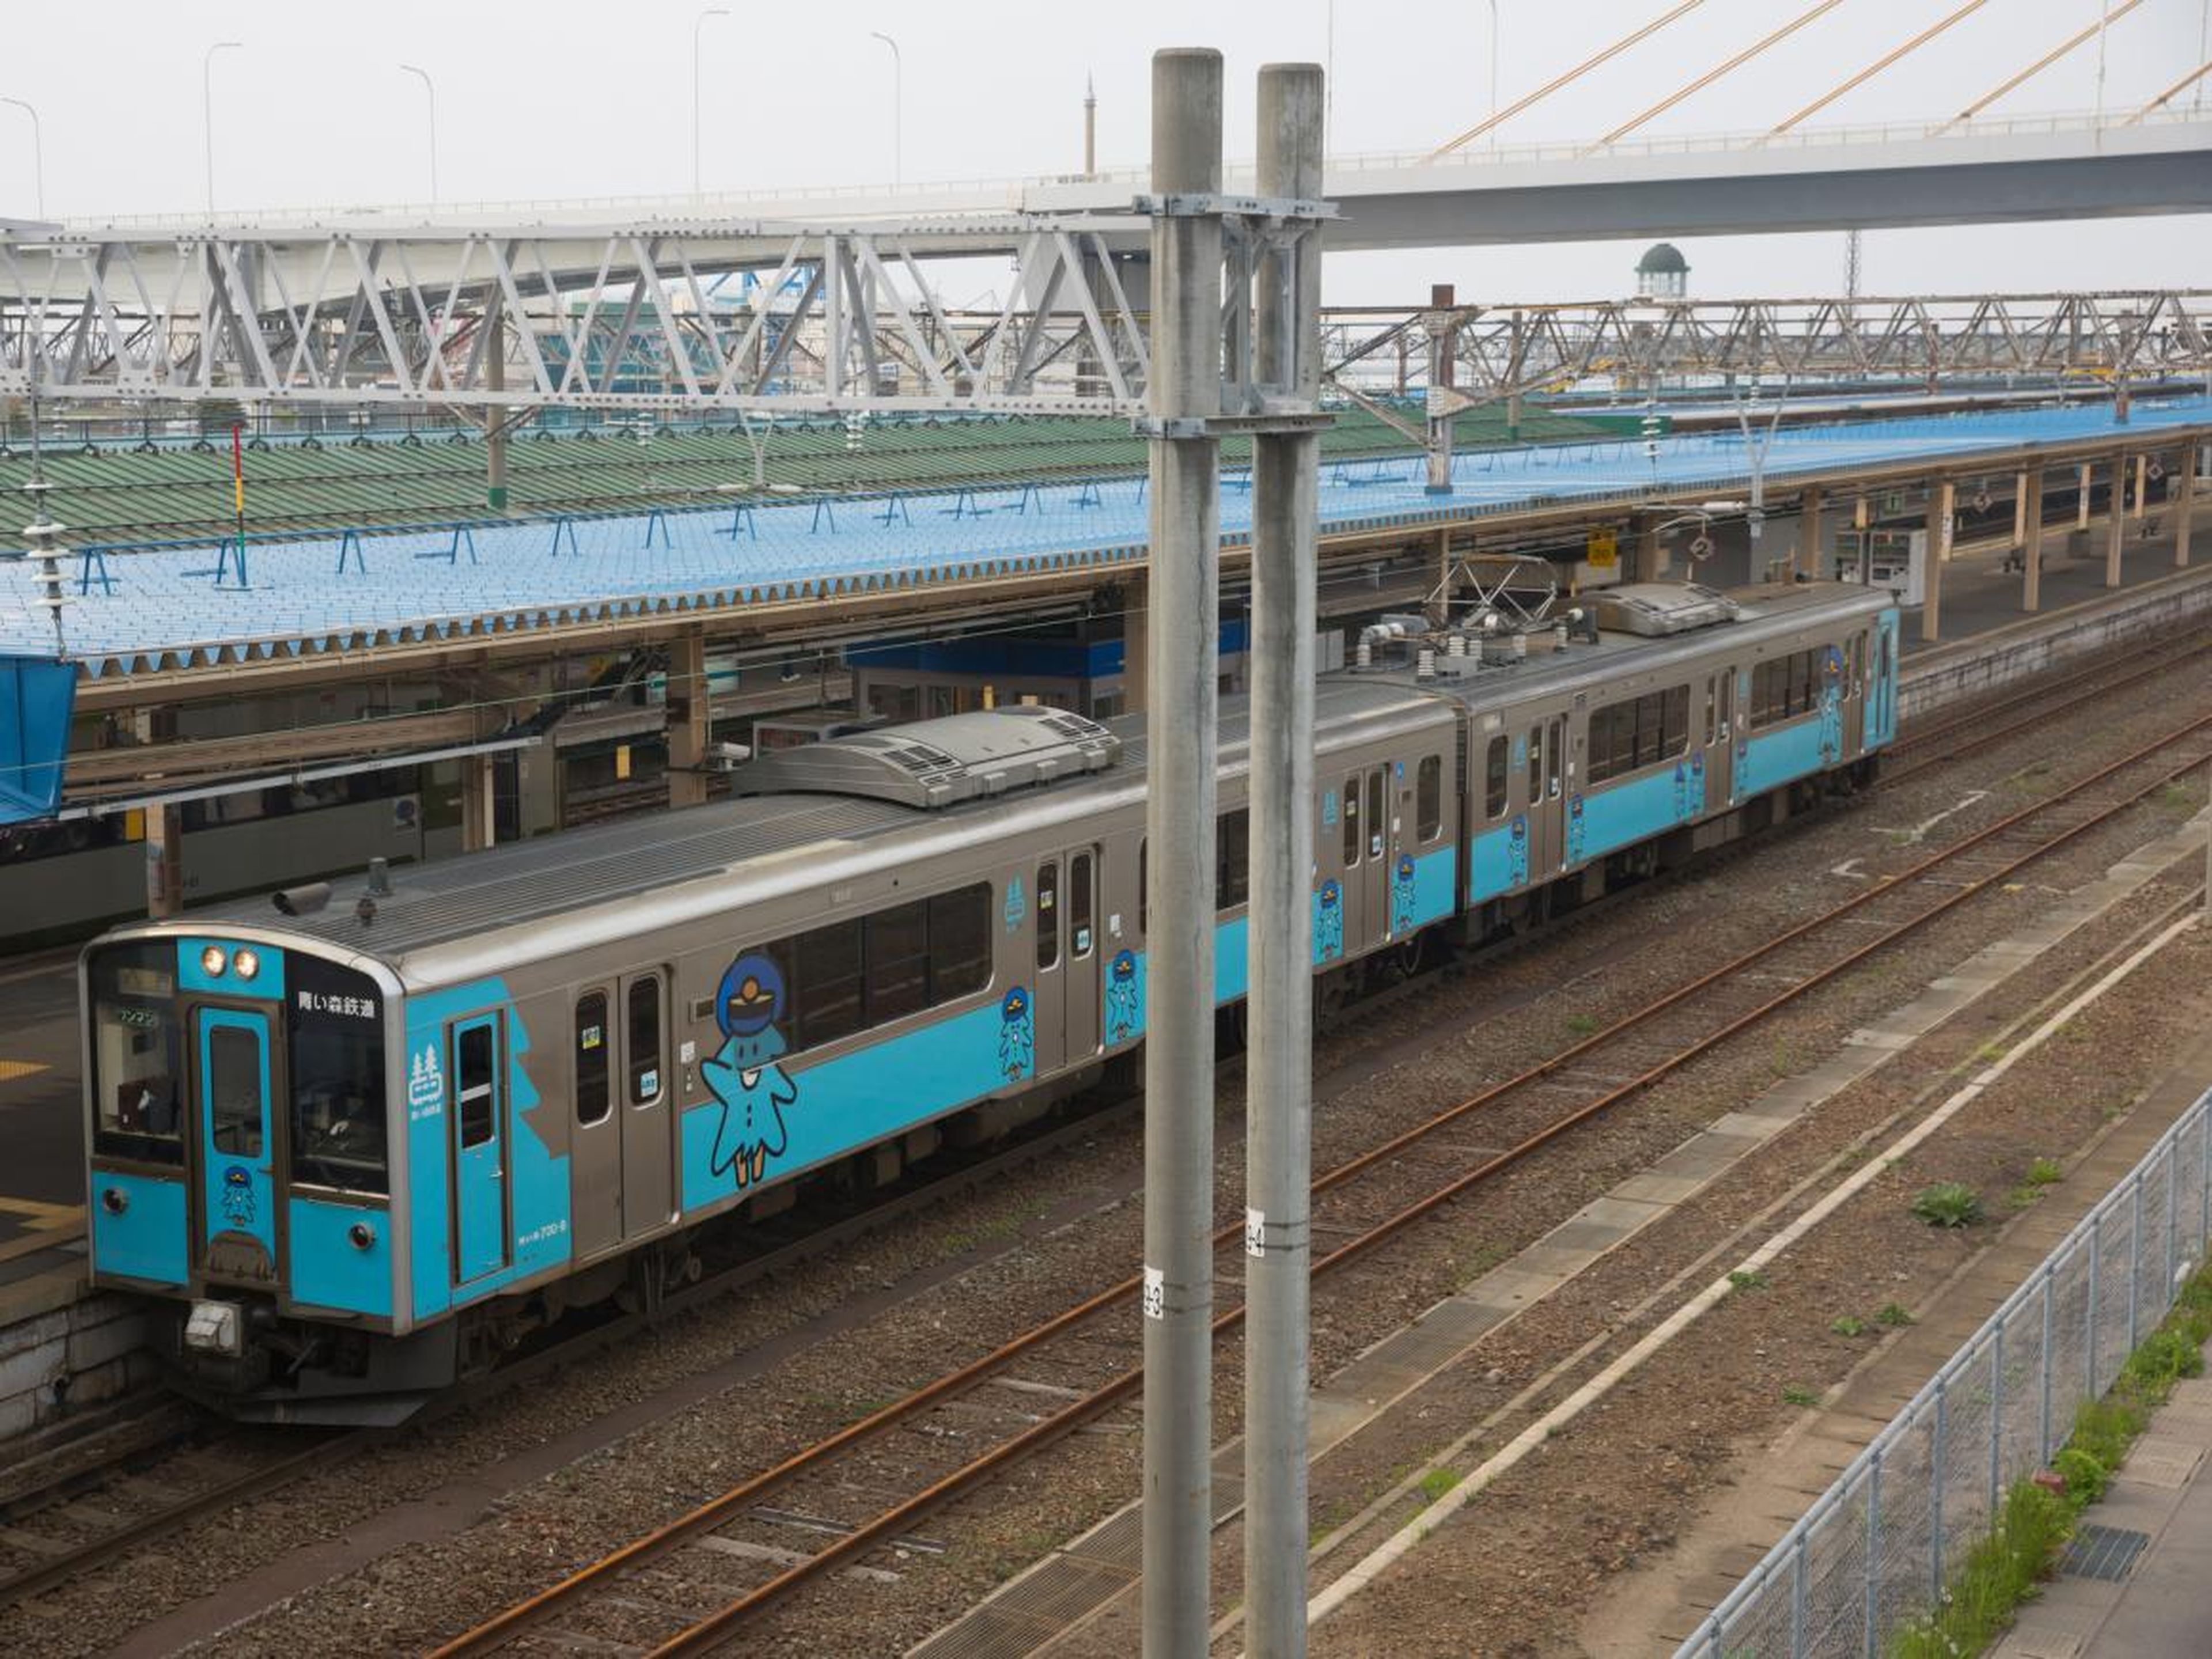 To travel around the prefecture, you can hop on the Aomori Railway Train at the station in Aomori City.